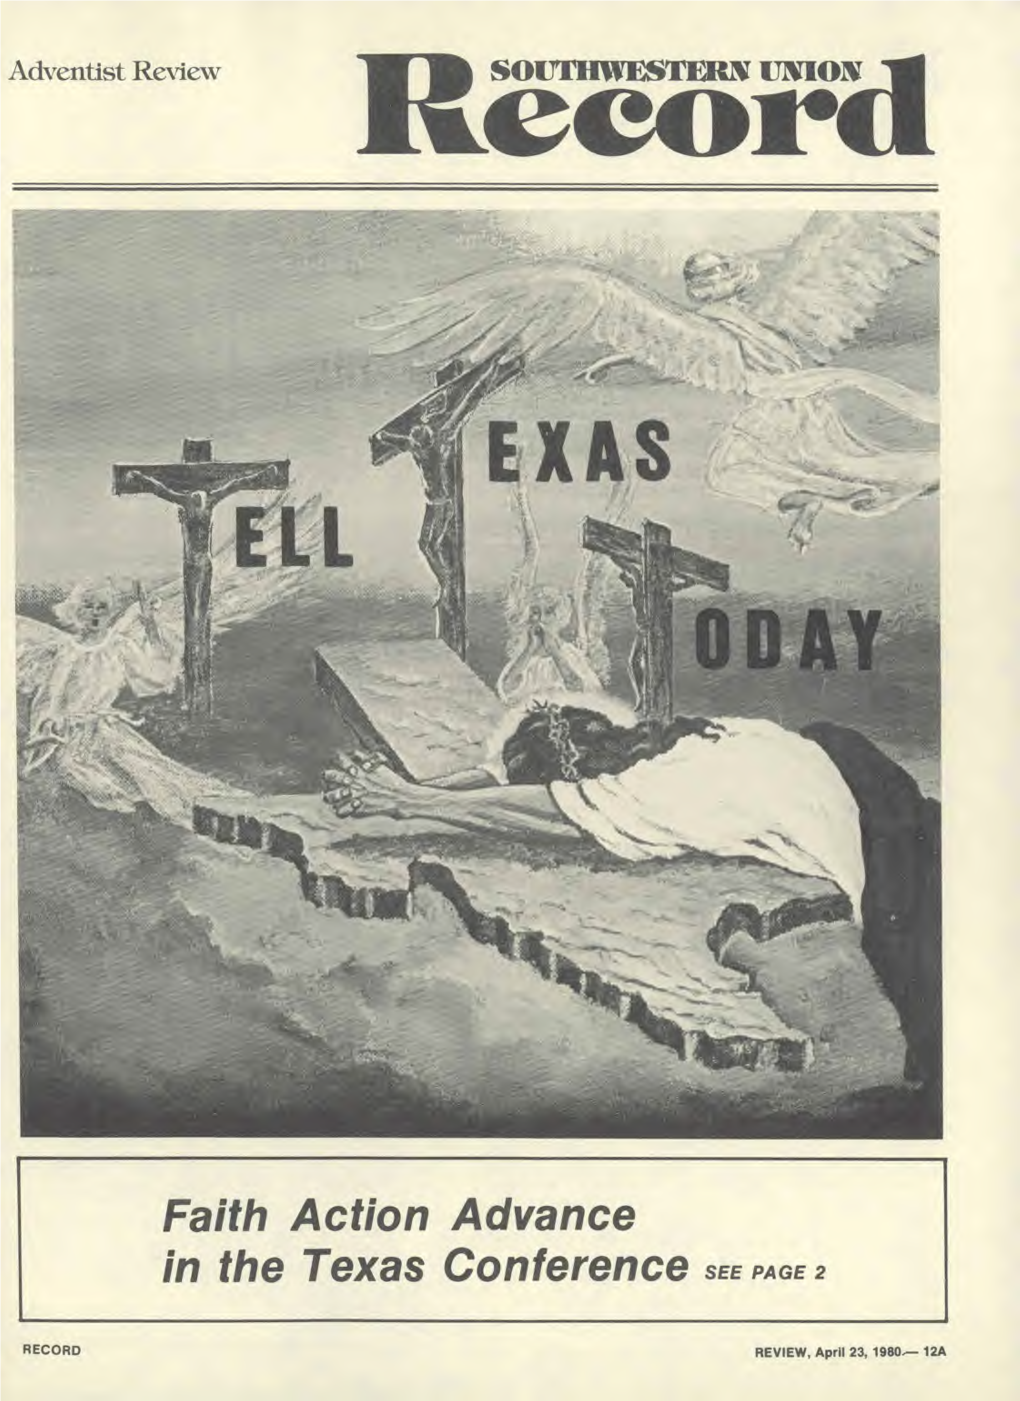 Faith Action Advance in the Texas Conference SEE PAGE 2